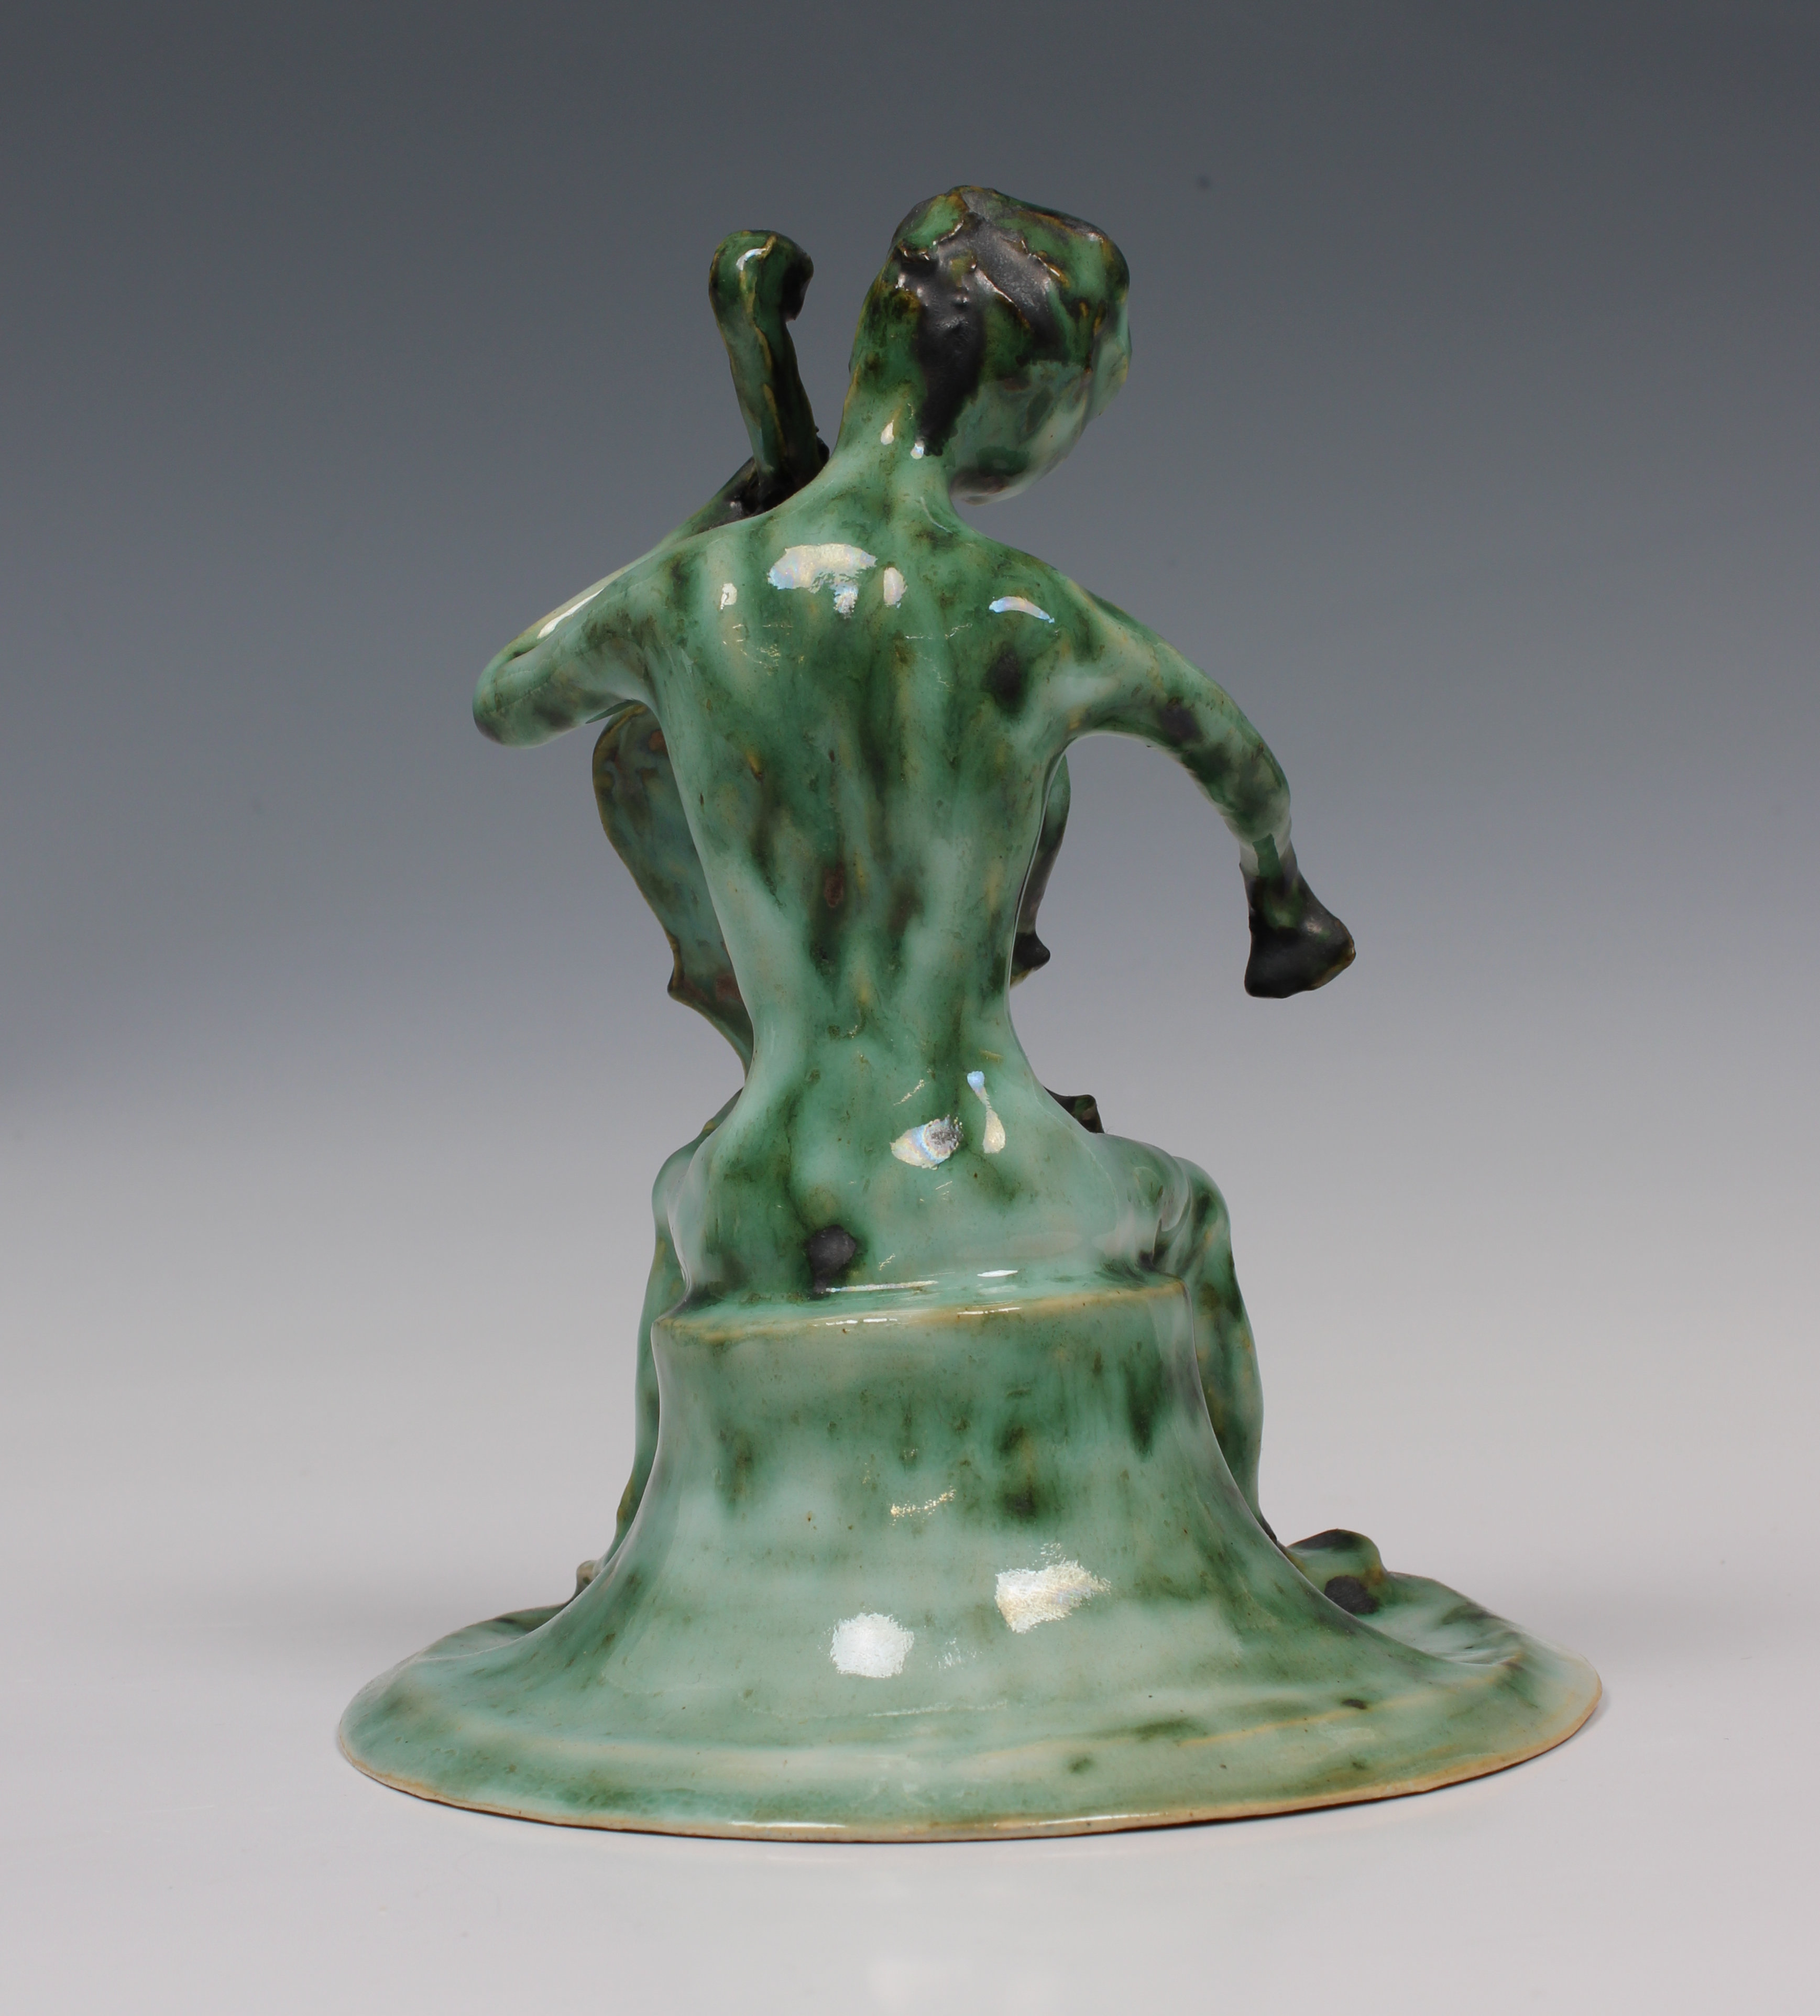 Elizabeth Ann Macphail (1939-89) A green glazed stylised cellist or double bass player sculpture - Image 3 of 5